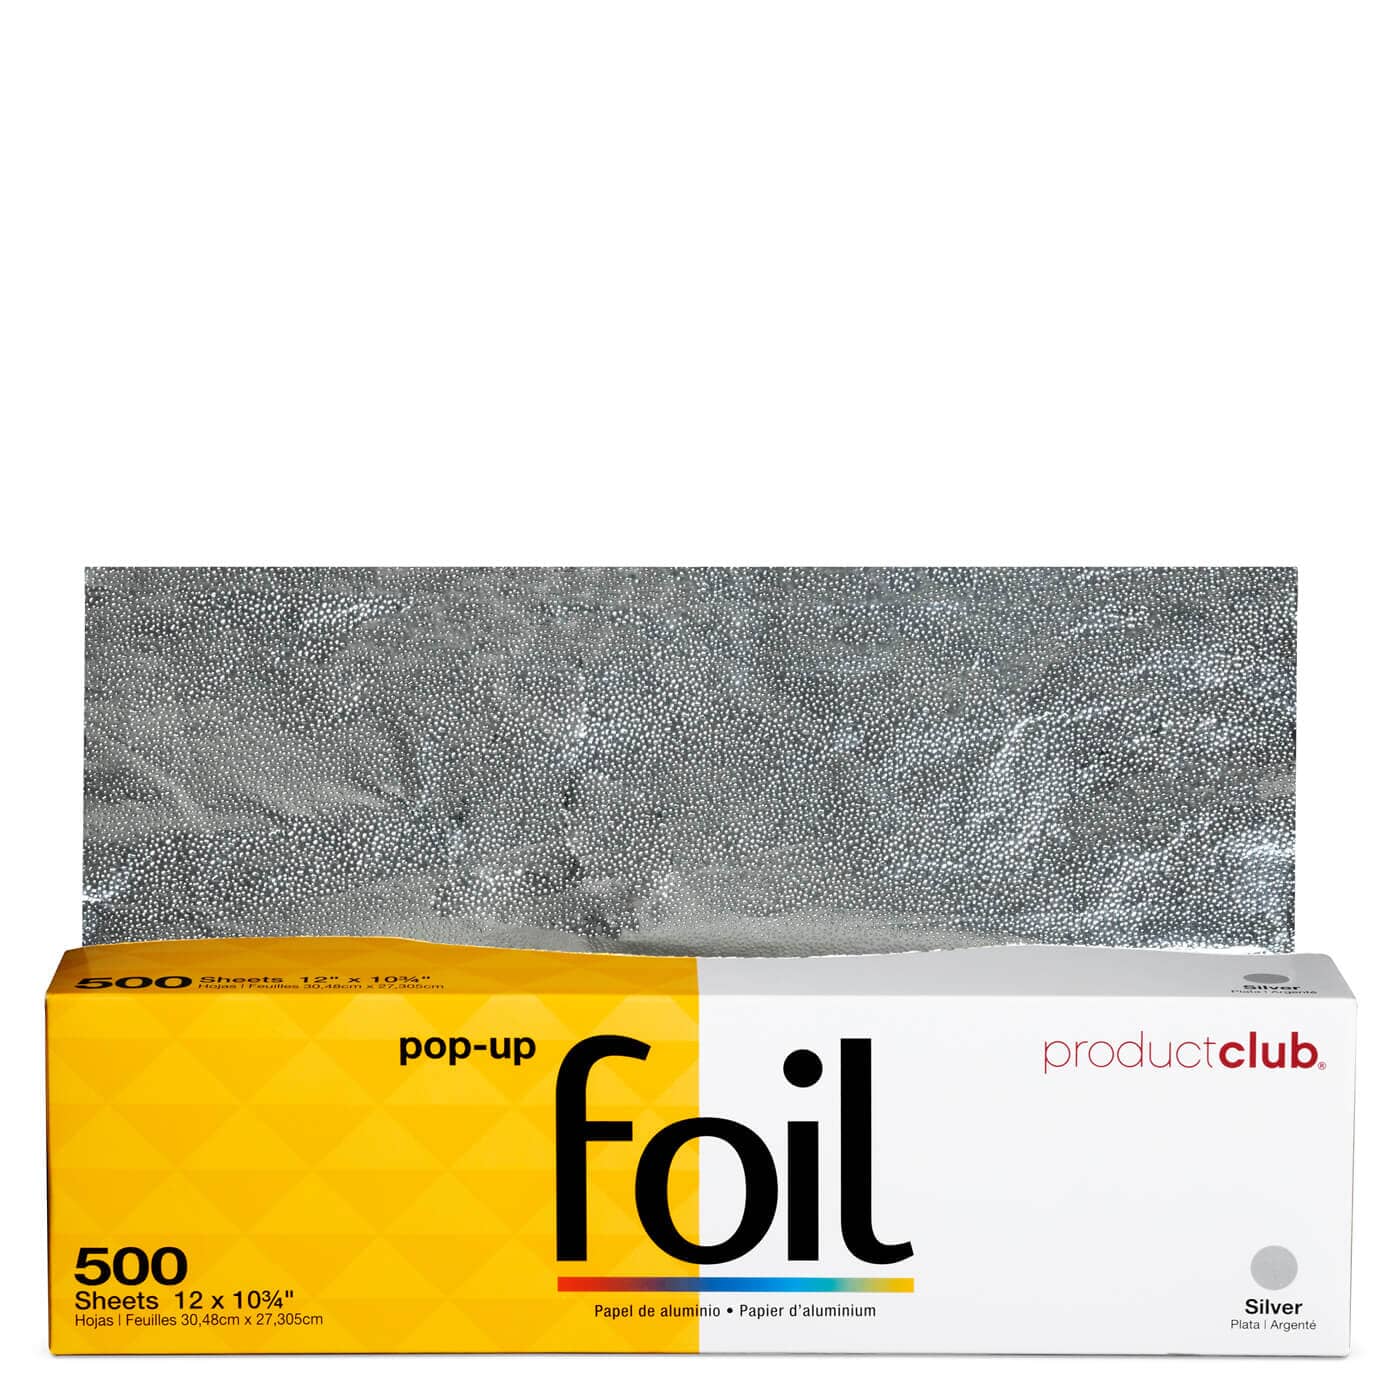 Pop-Up 500 Sheets | 12" x 10 3/4" | Silver | FS300 | Product Club HAIR COLORING ACCESSORIES PRODUCT CLUB 